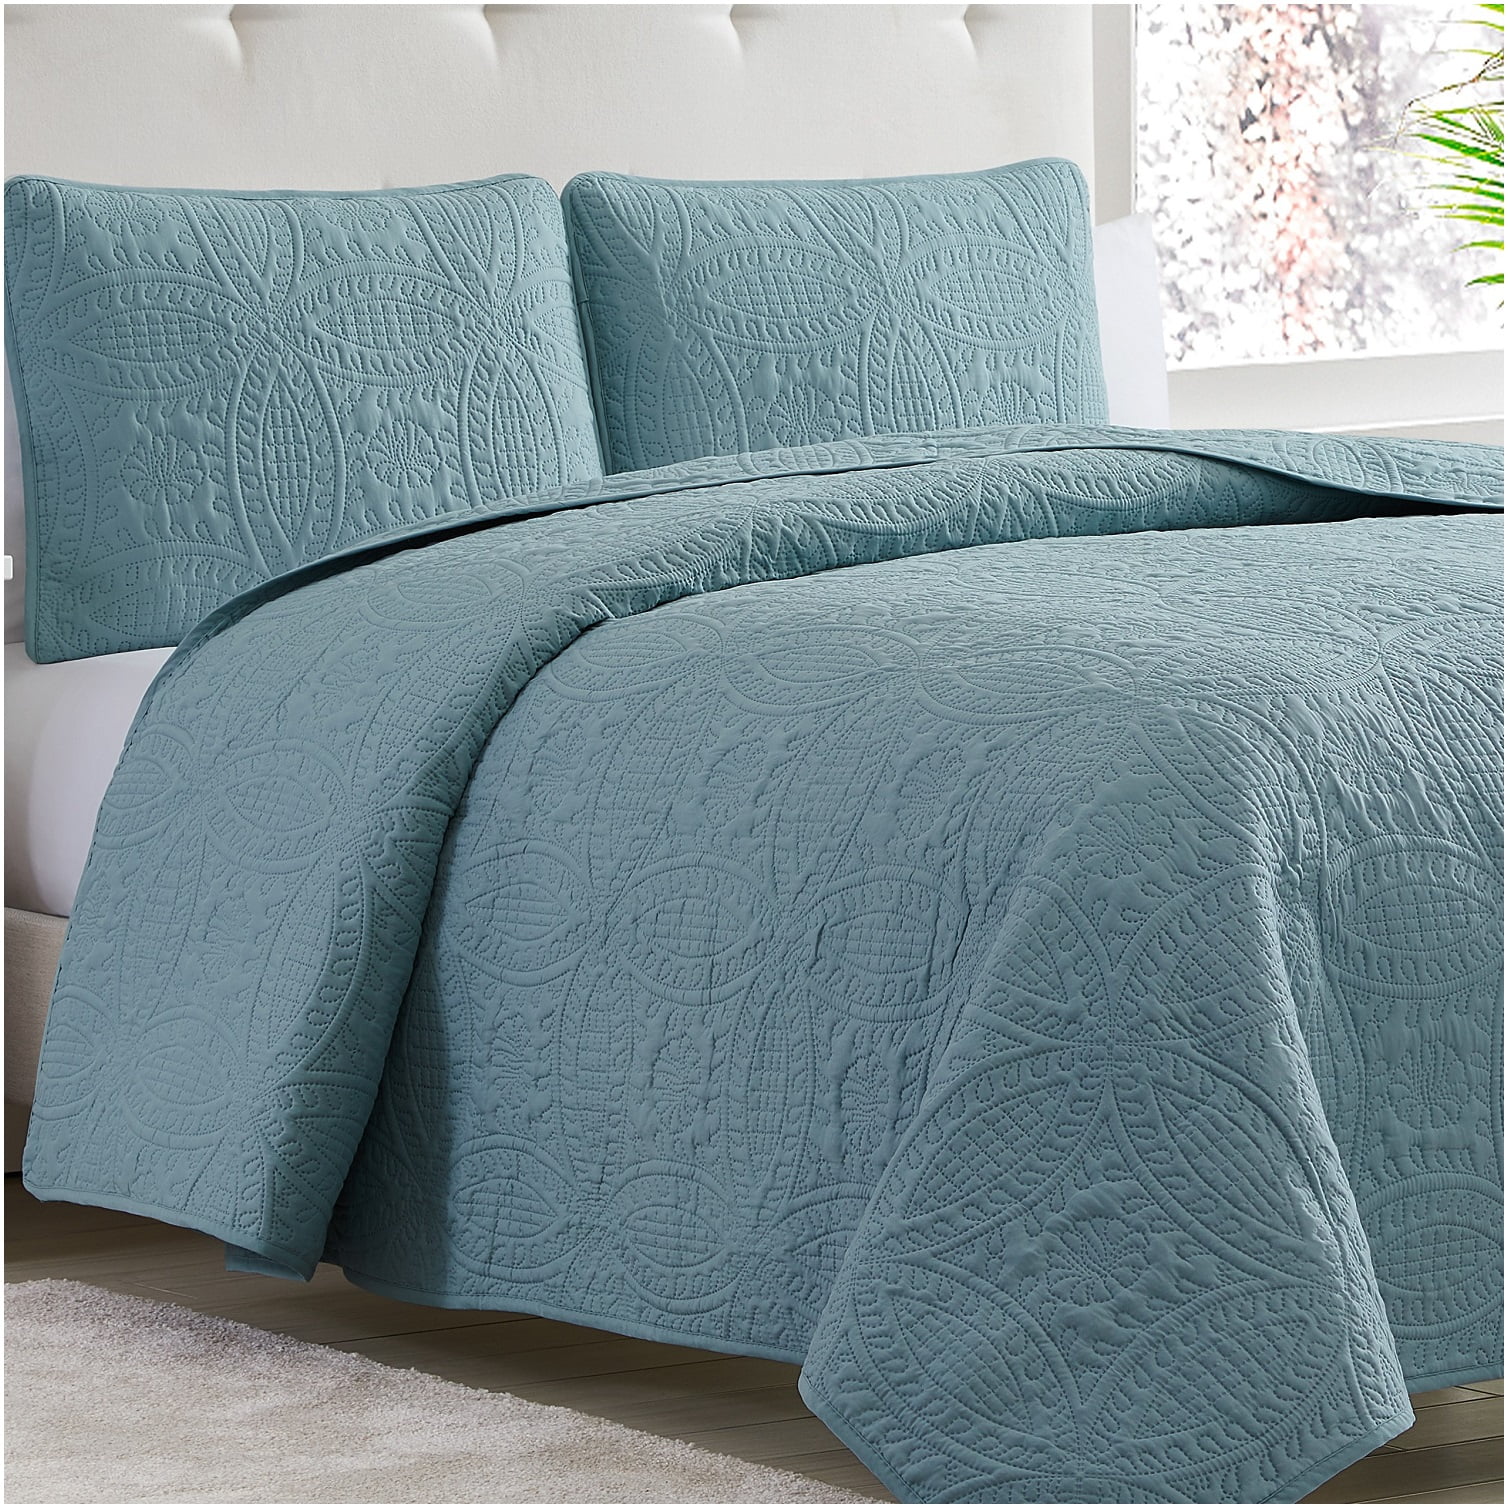 Mellanni Bedspread Coverlet Set, Oversized Quilts For California King Size Beds